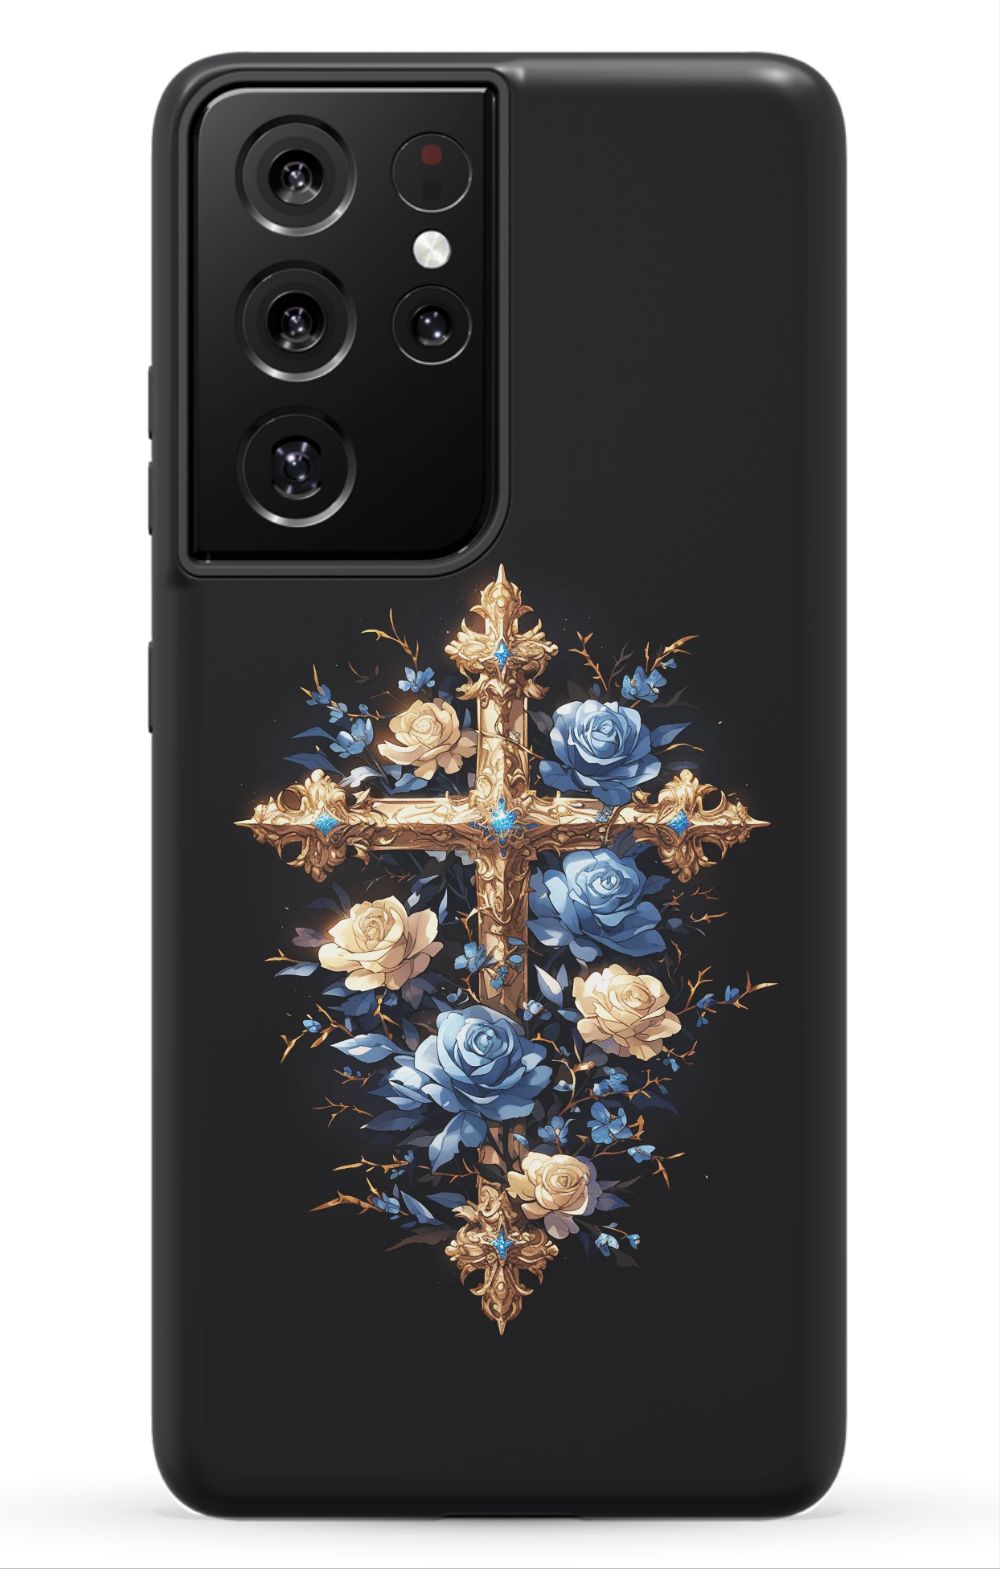 Phone Case "Celestial Faith": A Symbol of Heavenly Guidance and Devotion